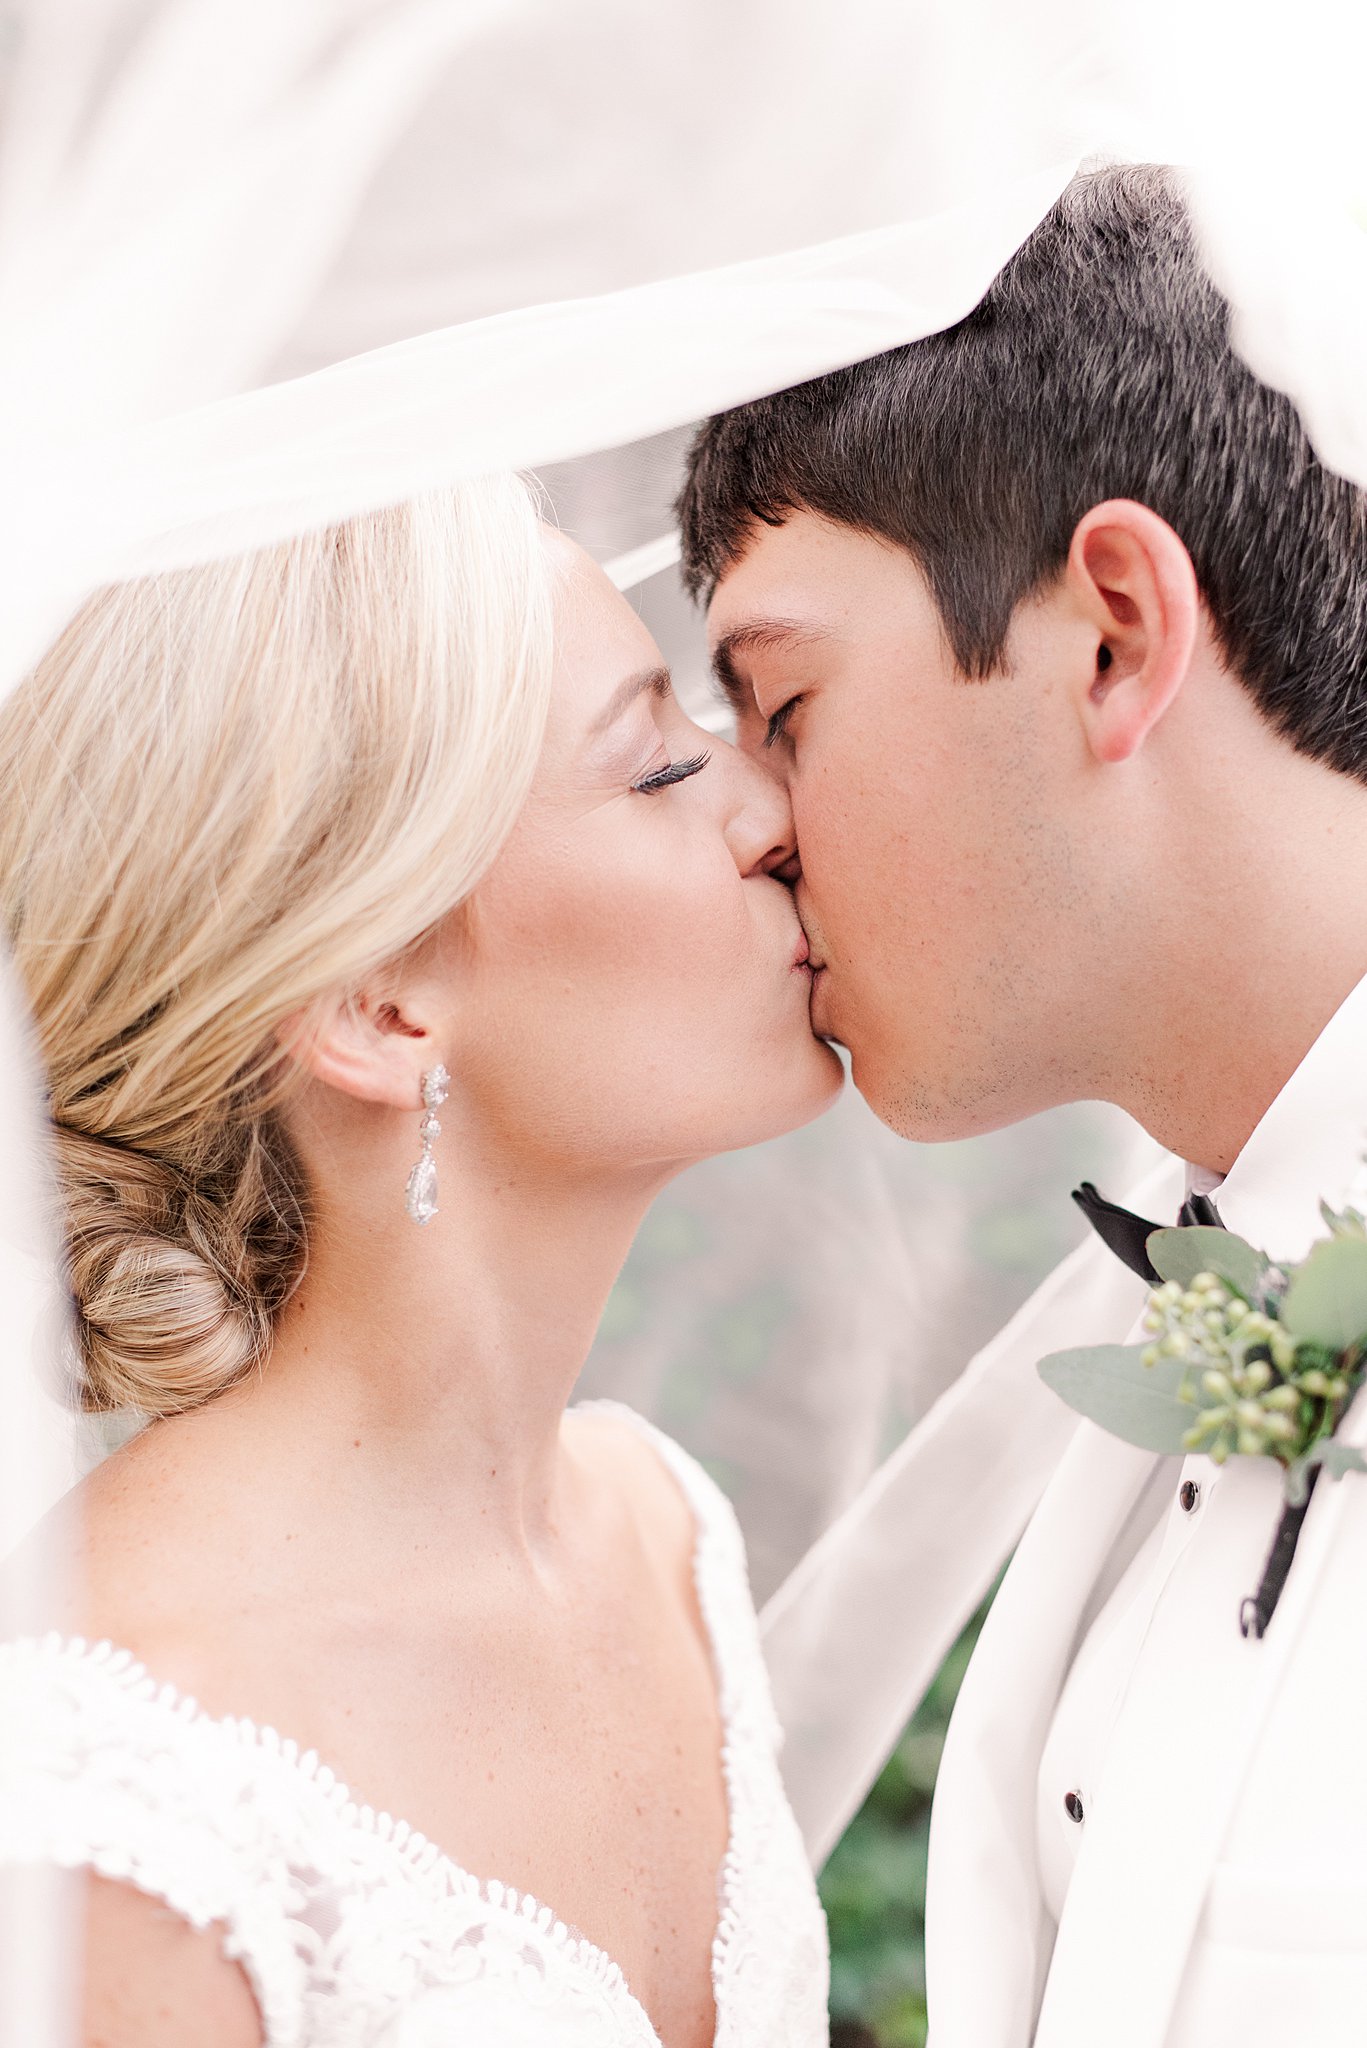 Newlyweds kiss while hiding under a veil in a white tuxedo and lace dress at their Belmont Manor Wedding